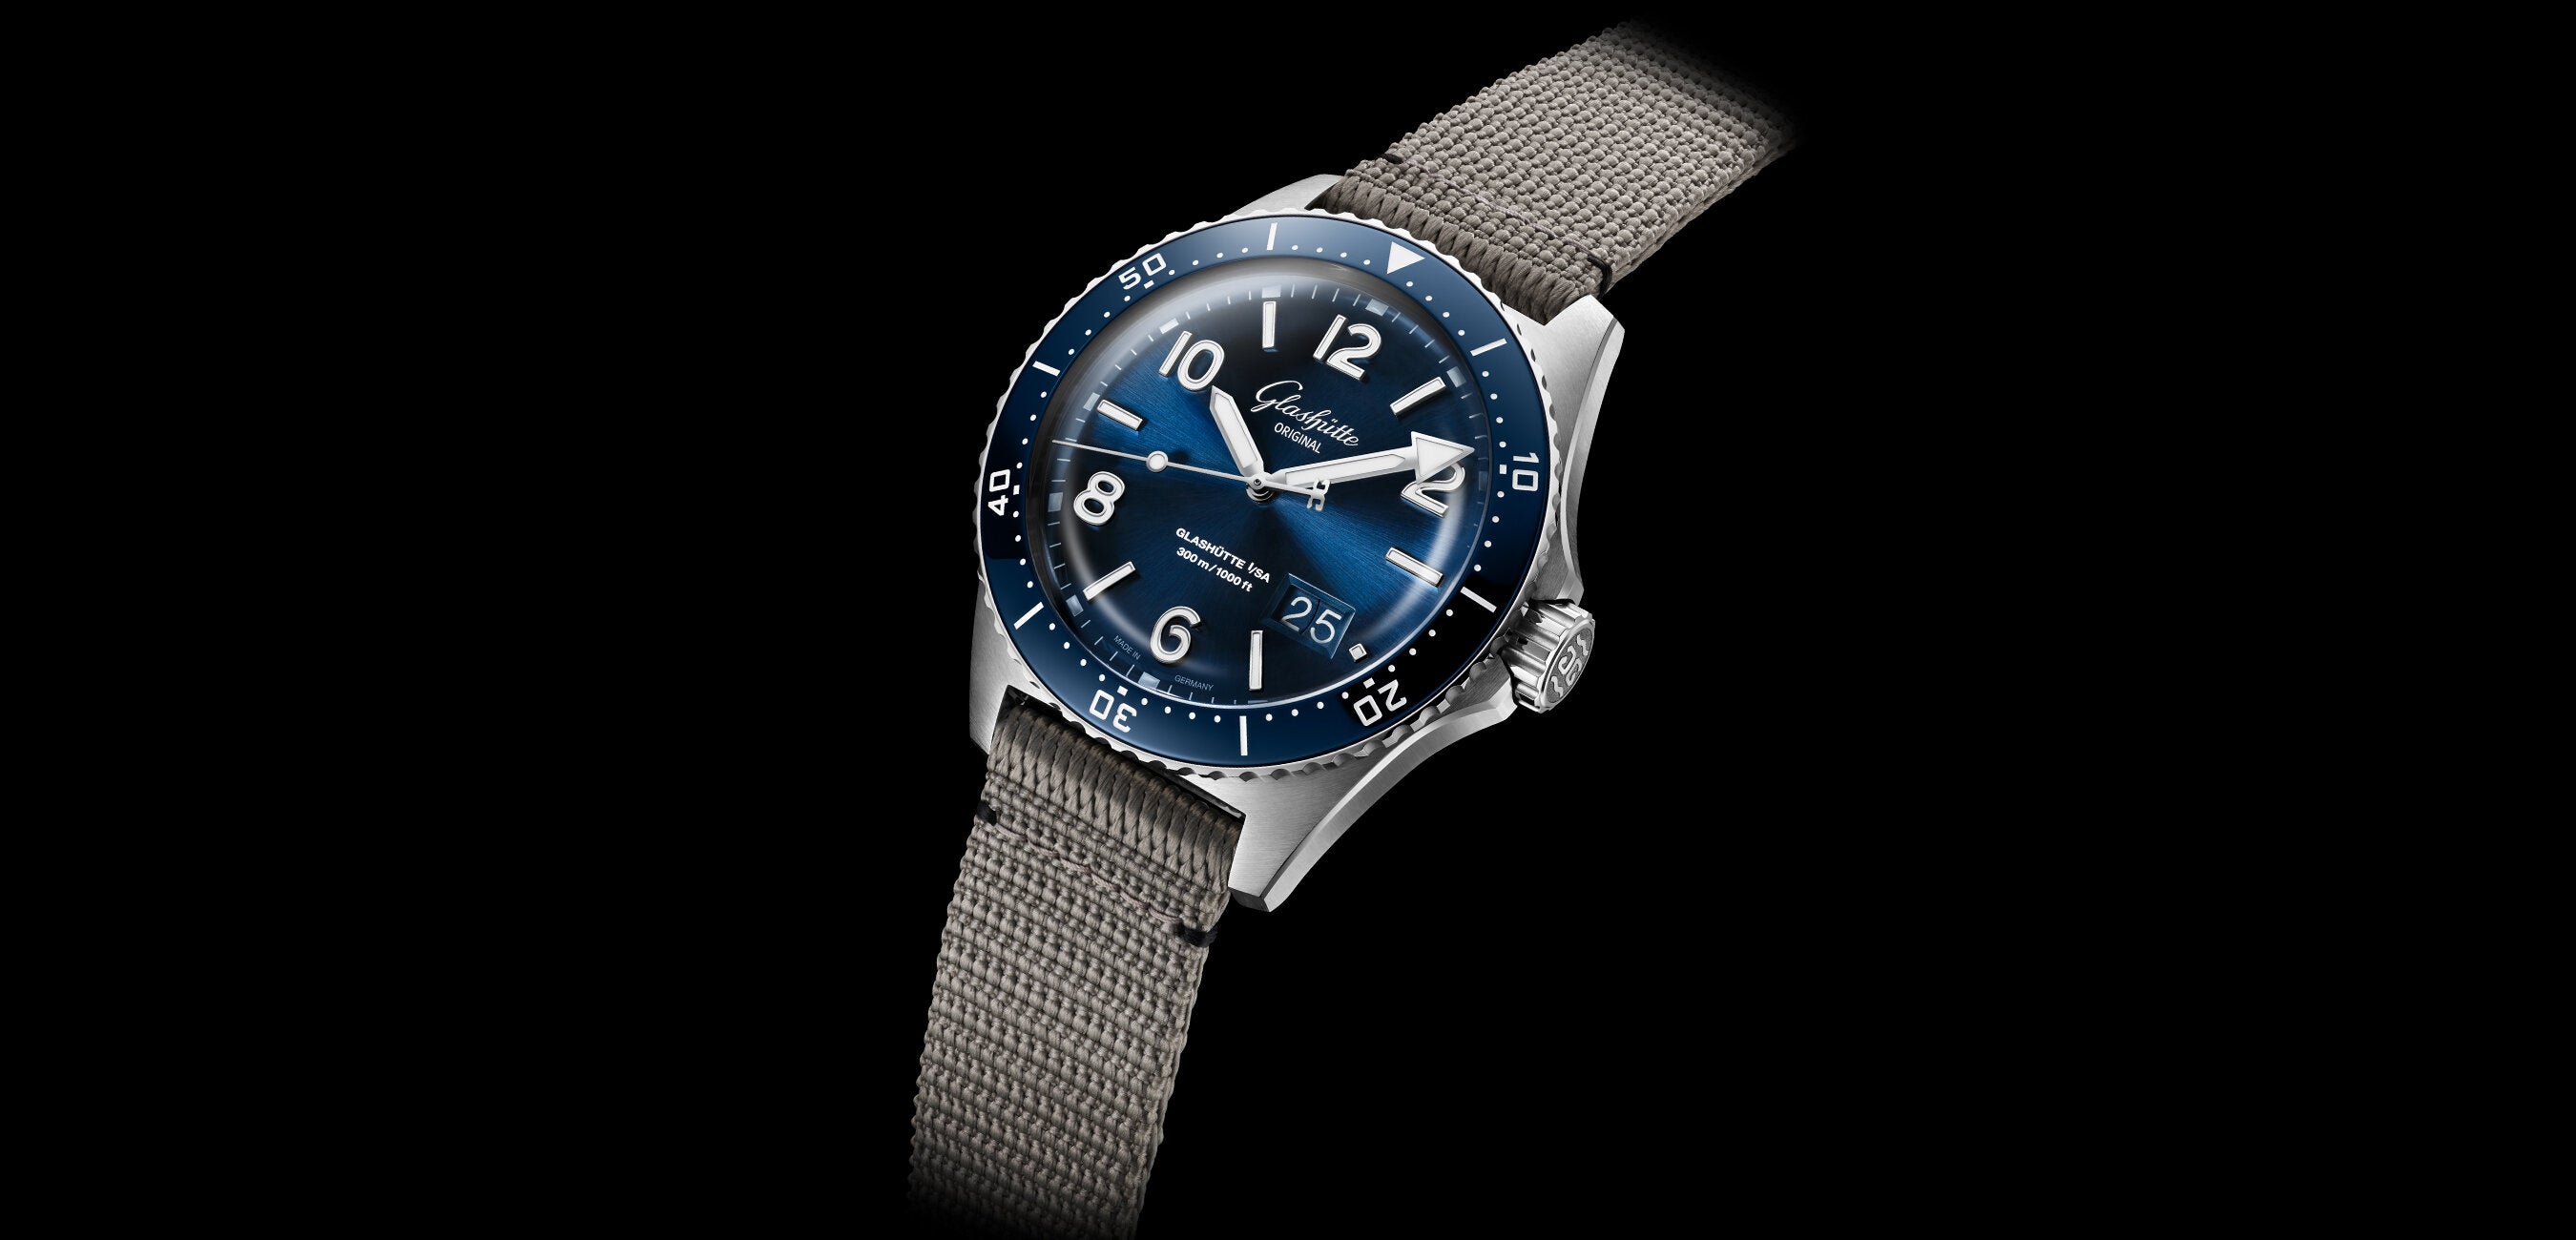 SeaQ revives tradition of diver’s watches made in Glashütte